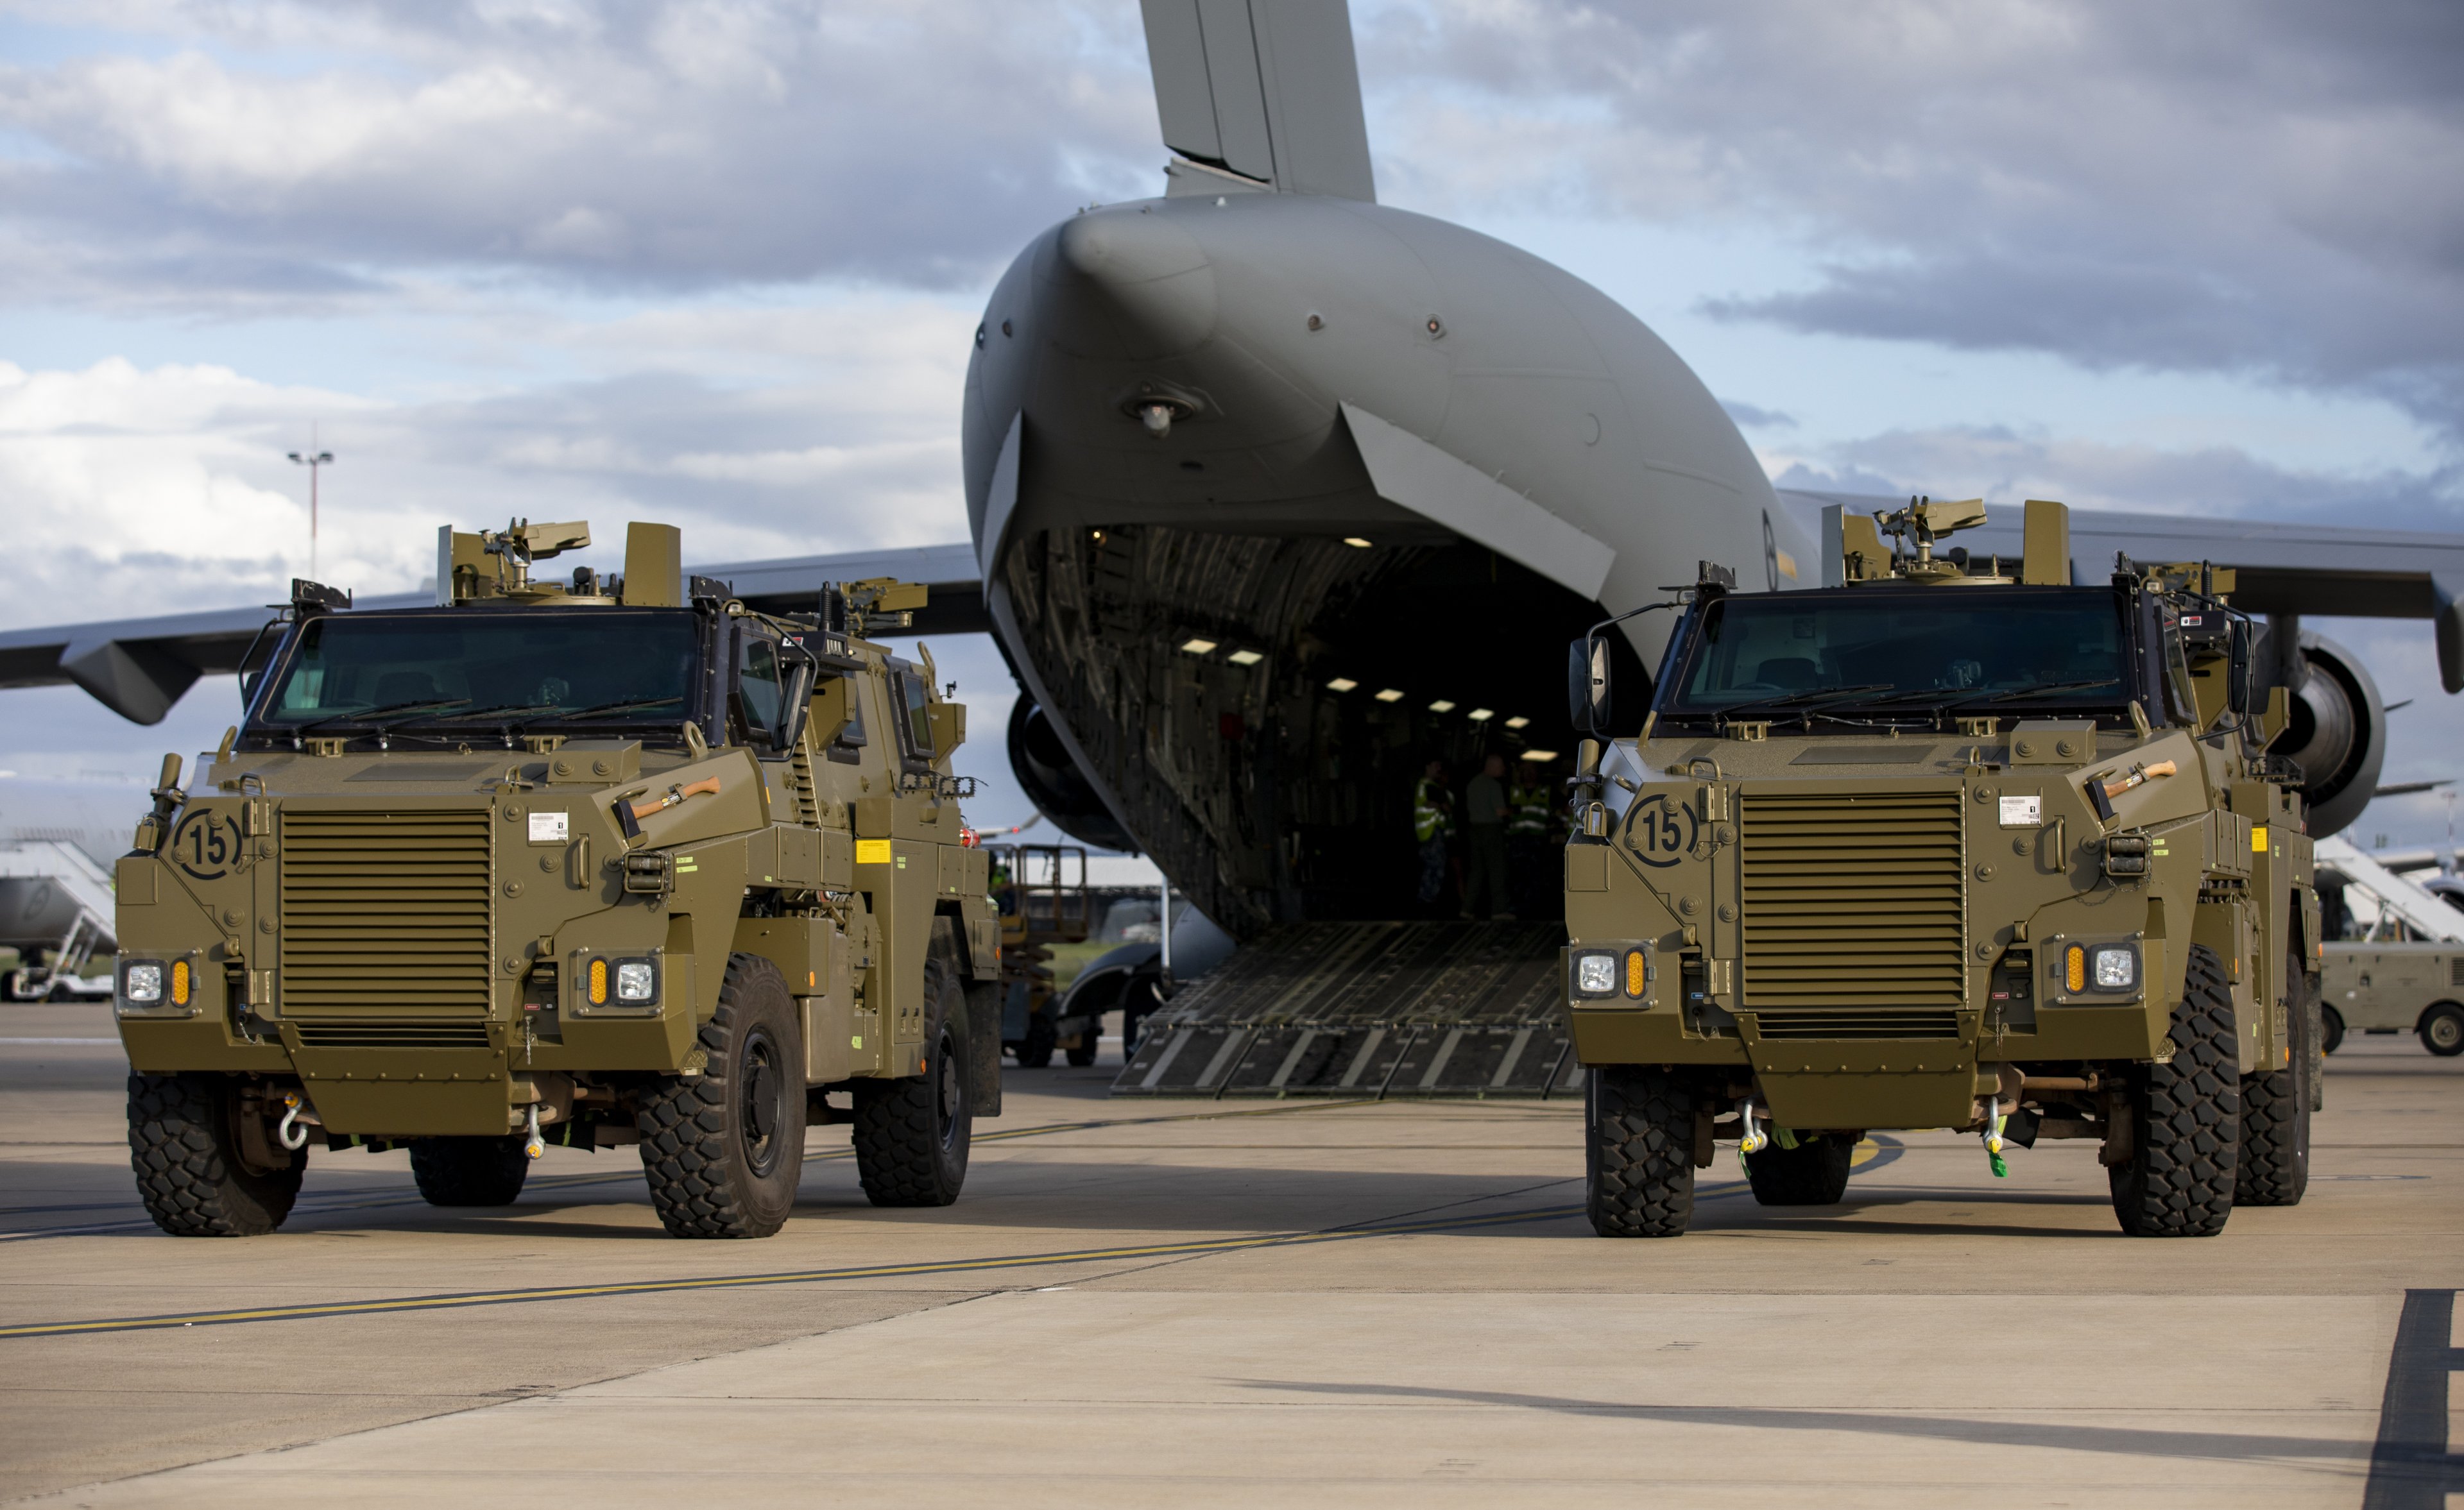 The first three of the Australian Government’s gift of 20 armored vehicles, being loaded for delivery to Ukraine at the RAAF Base Amberley in Queensland, Australia.